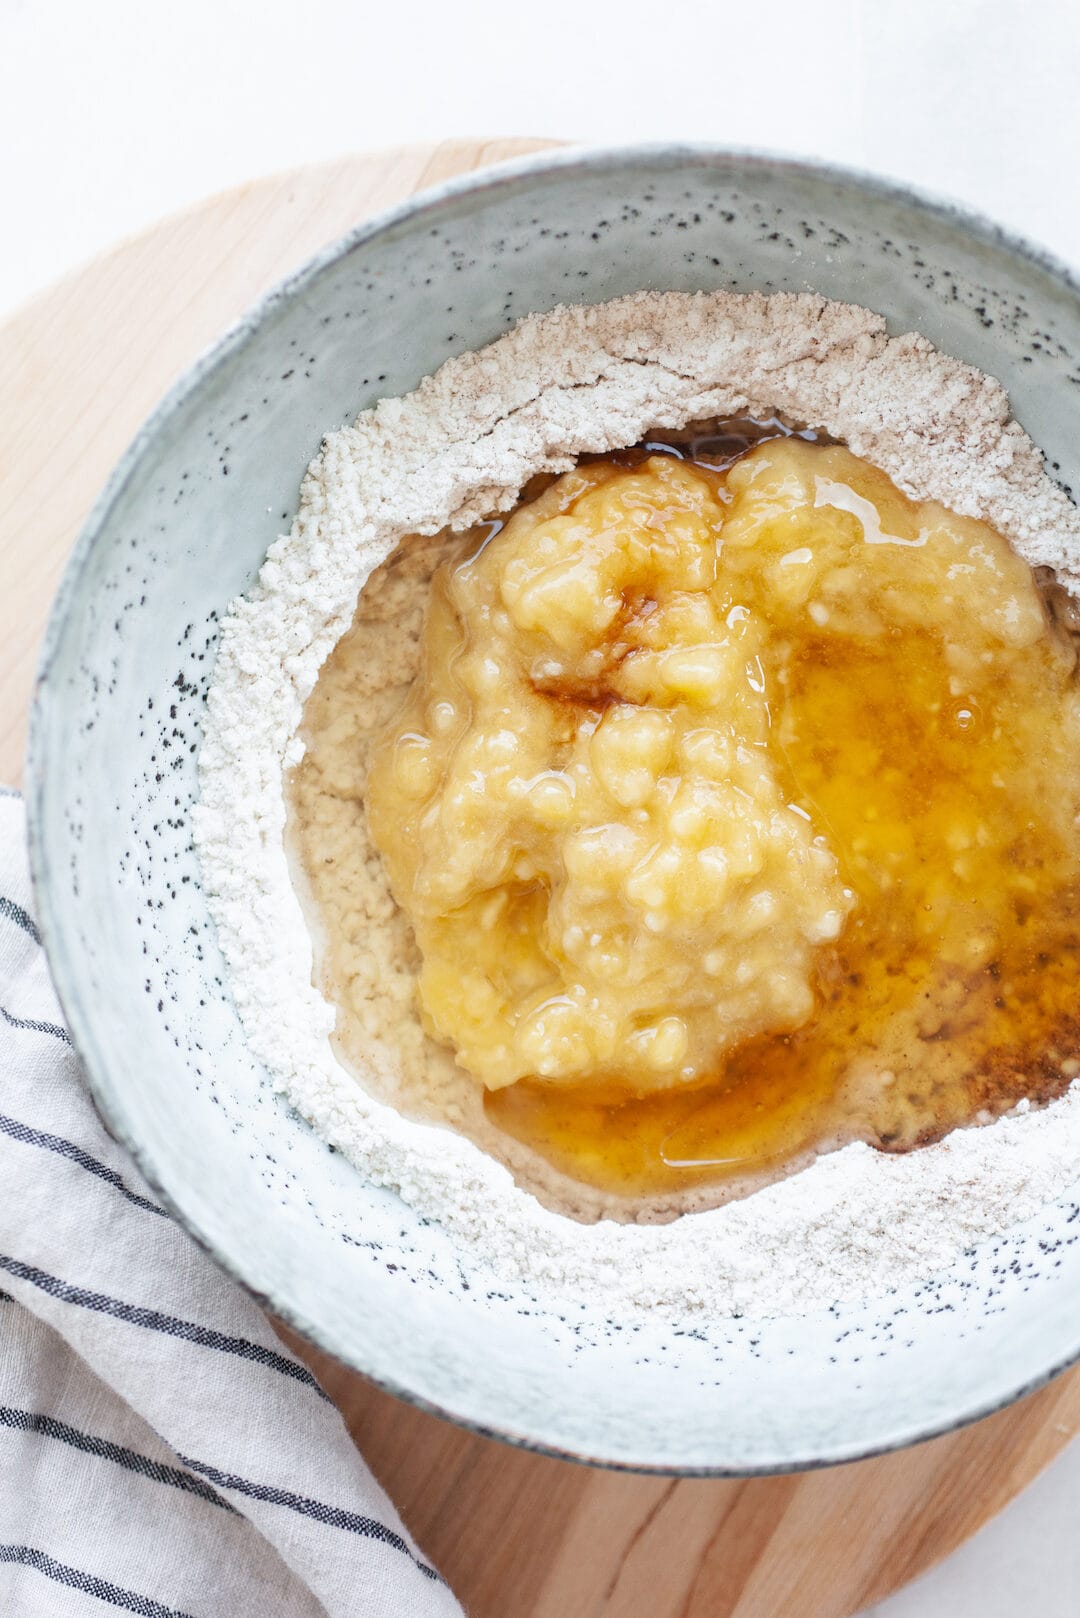 Mashed banana and flour in a bowl for instant pot banana bread